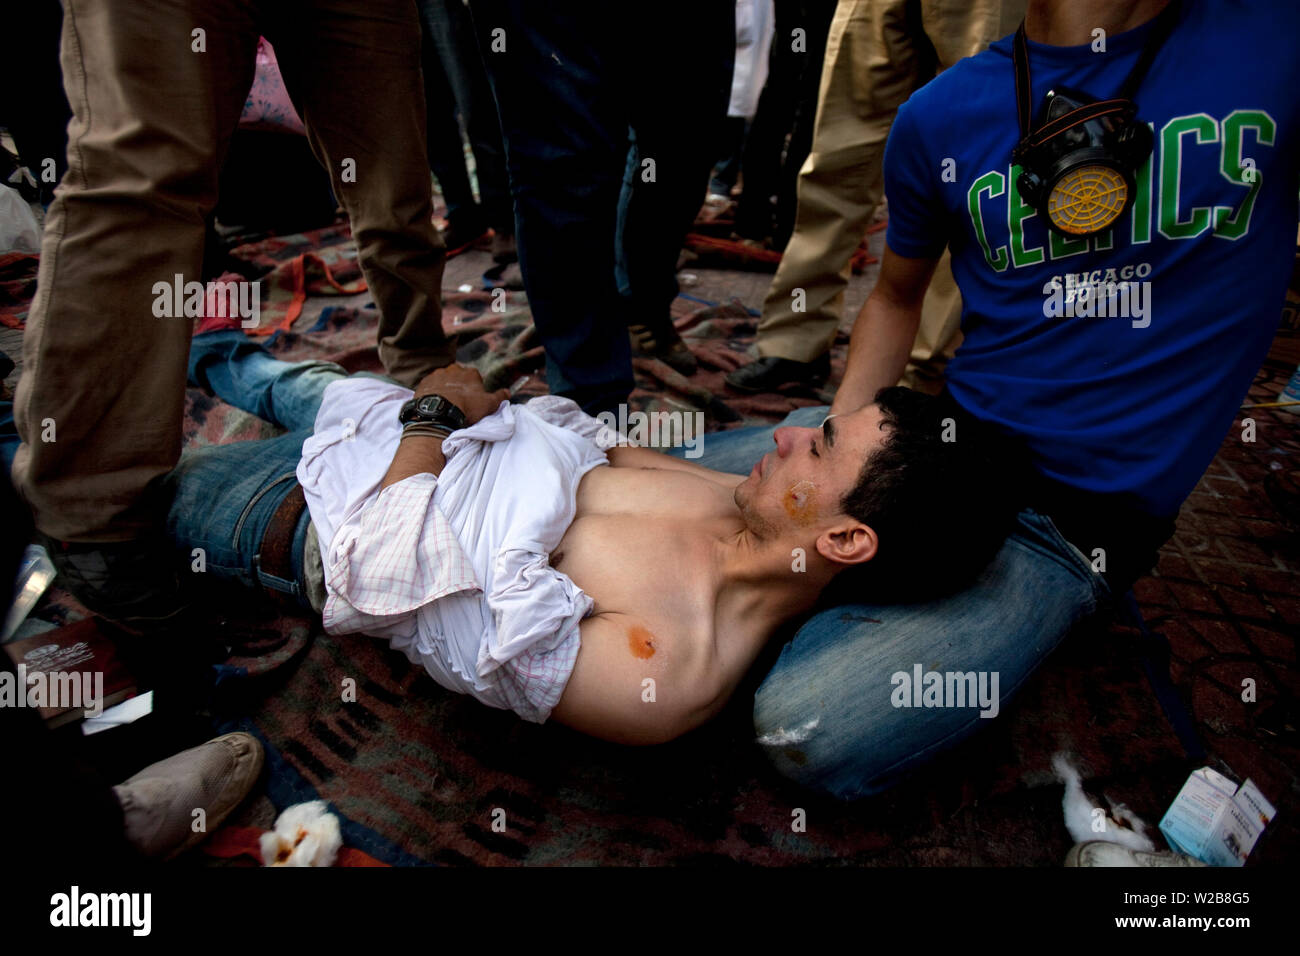 November 21, 2011 – Cairo, Egypt – Egyptian medical team treat an Egyptian protester injured by rubber bullets and tear gas at a field clinic in Cairo’s Tahrir Square. Security forces fired tear gas and rubber bullets during clashes with several thousand protesters in Cairo's Tahrir Square in the third straight day of violence that has killed at least 24 people and has turned into the most sustained challenge yet to the rule of Egypt's military. Protesters are calling on the ruling military to quickly announce a date for the transfer of power to a civilian administration. The clashes were the Stock Photo